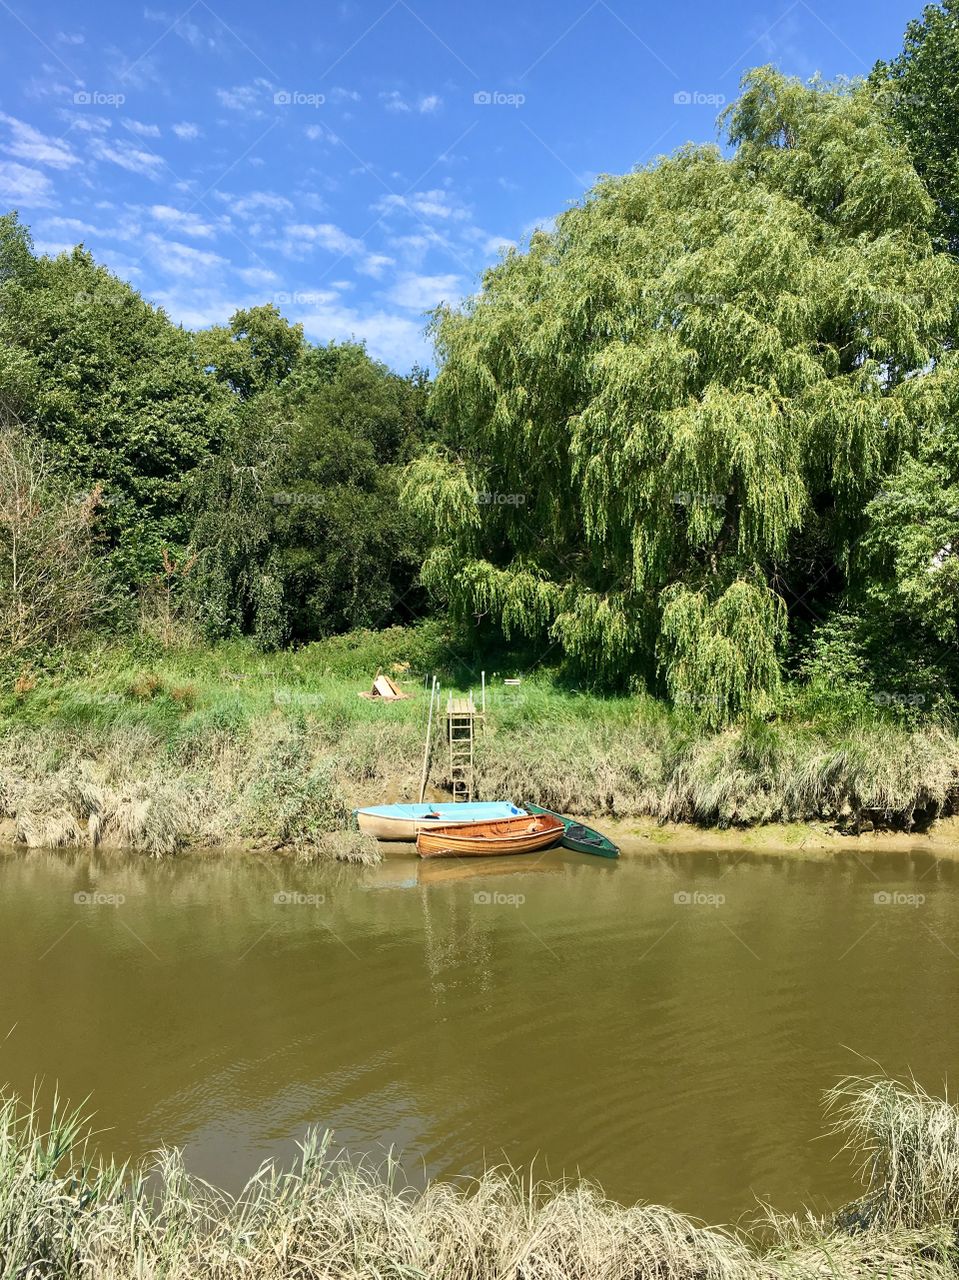 Wooden boat on shore of river ouse, South Downs National Park, Lewes, East Sussex, England